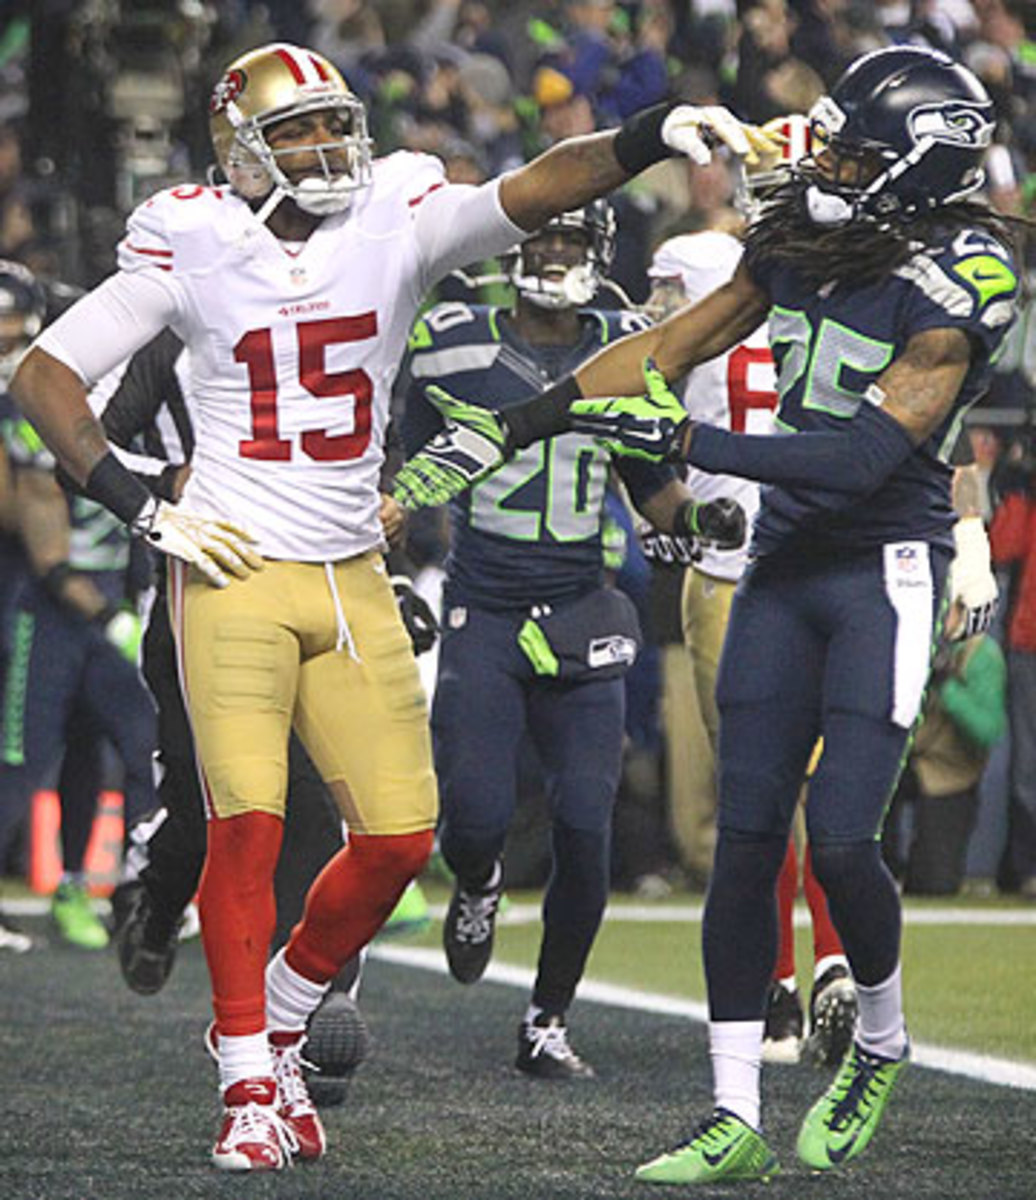 Crabtree and Sherman reportedly have a history, which carried over onto the field Sunday. (Tony Overman/Getty Images)